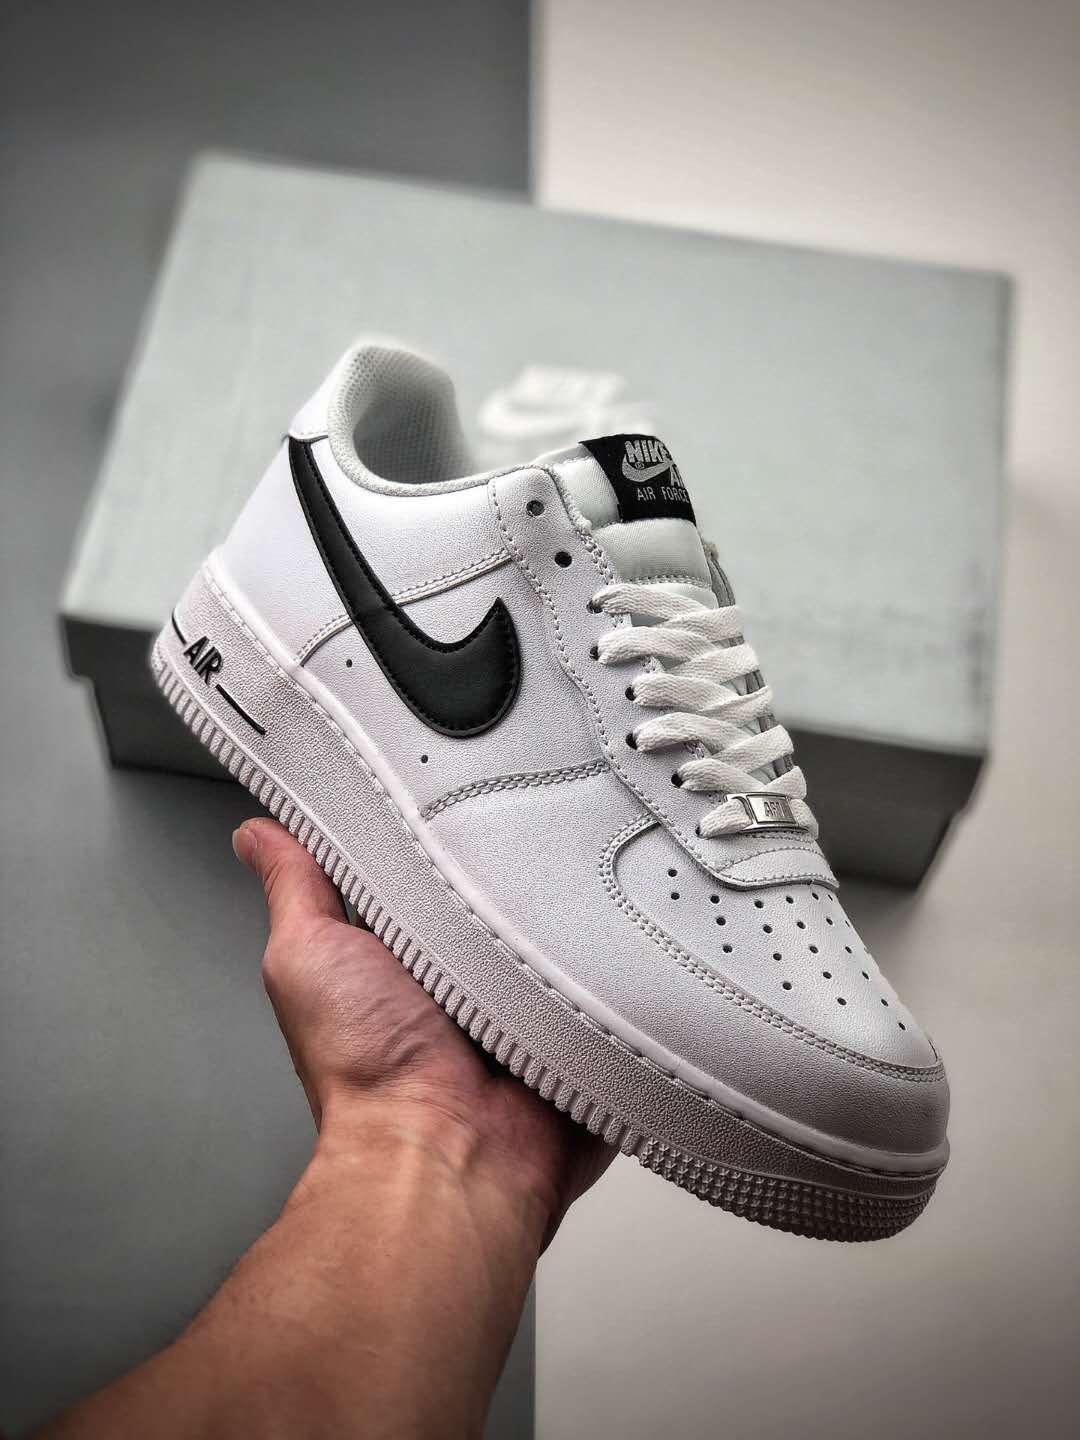 Nike Air Force 1 'White Black' CT7724-100 - Classic Style with Modern Flair